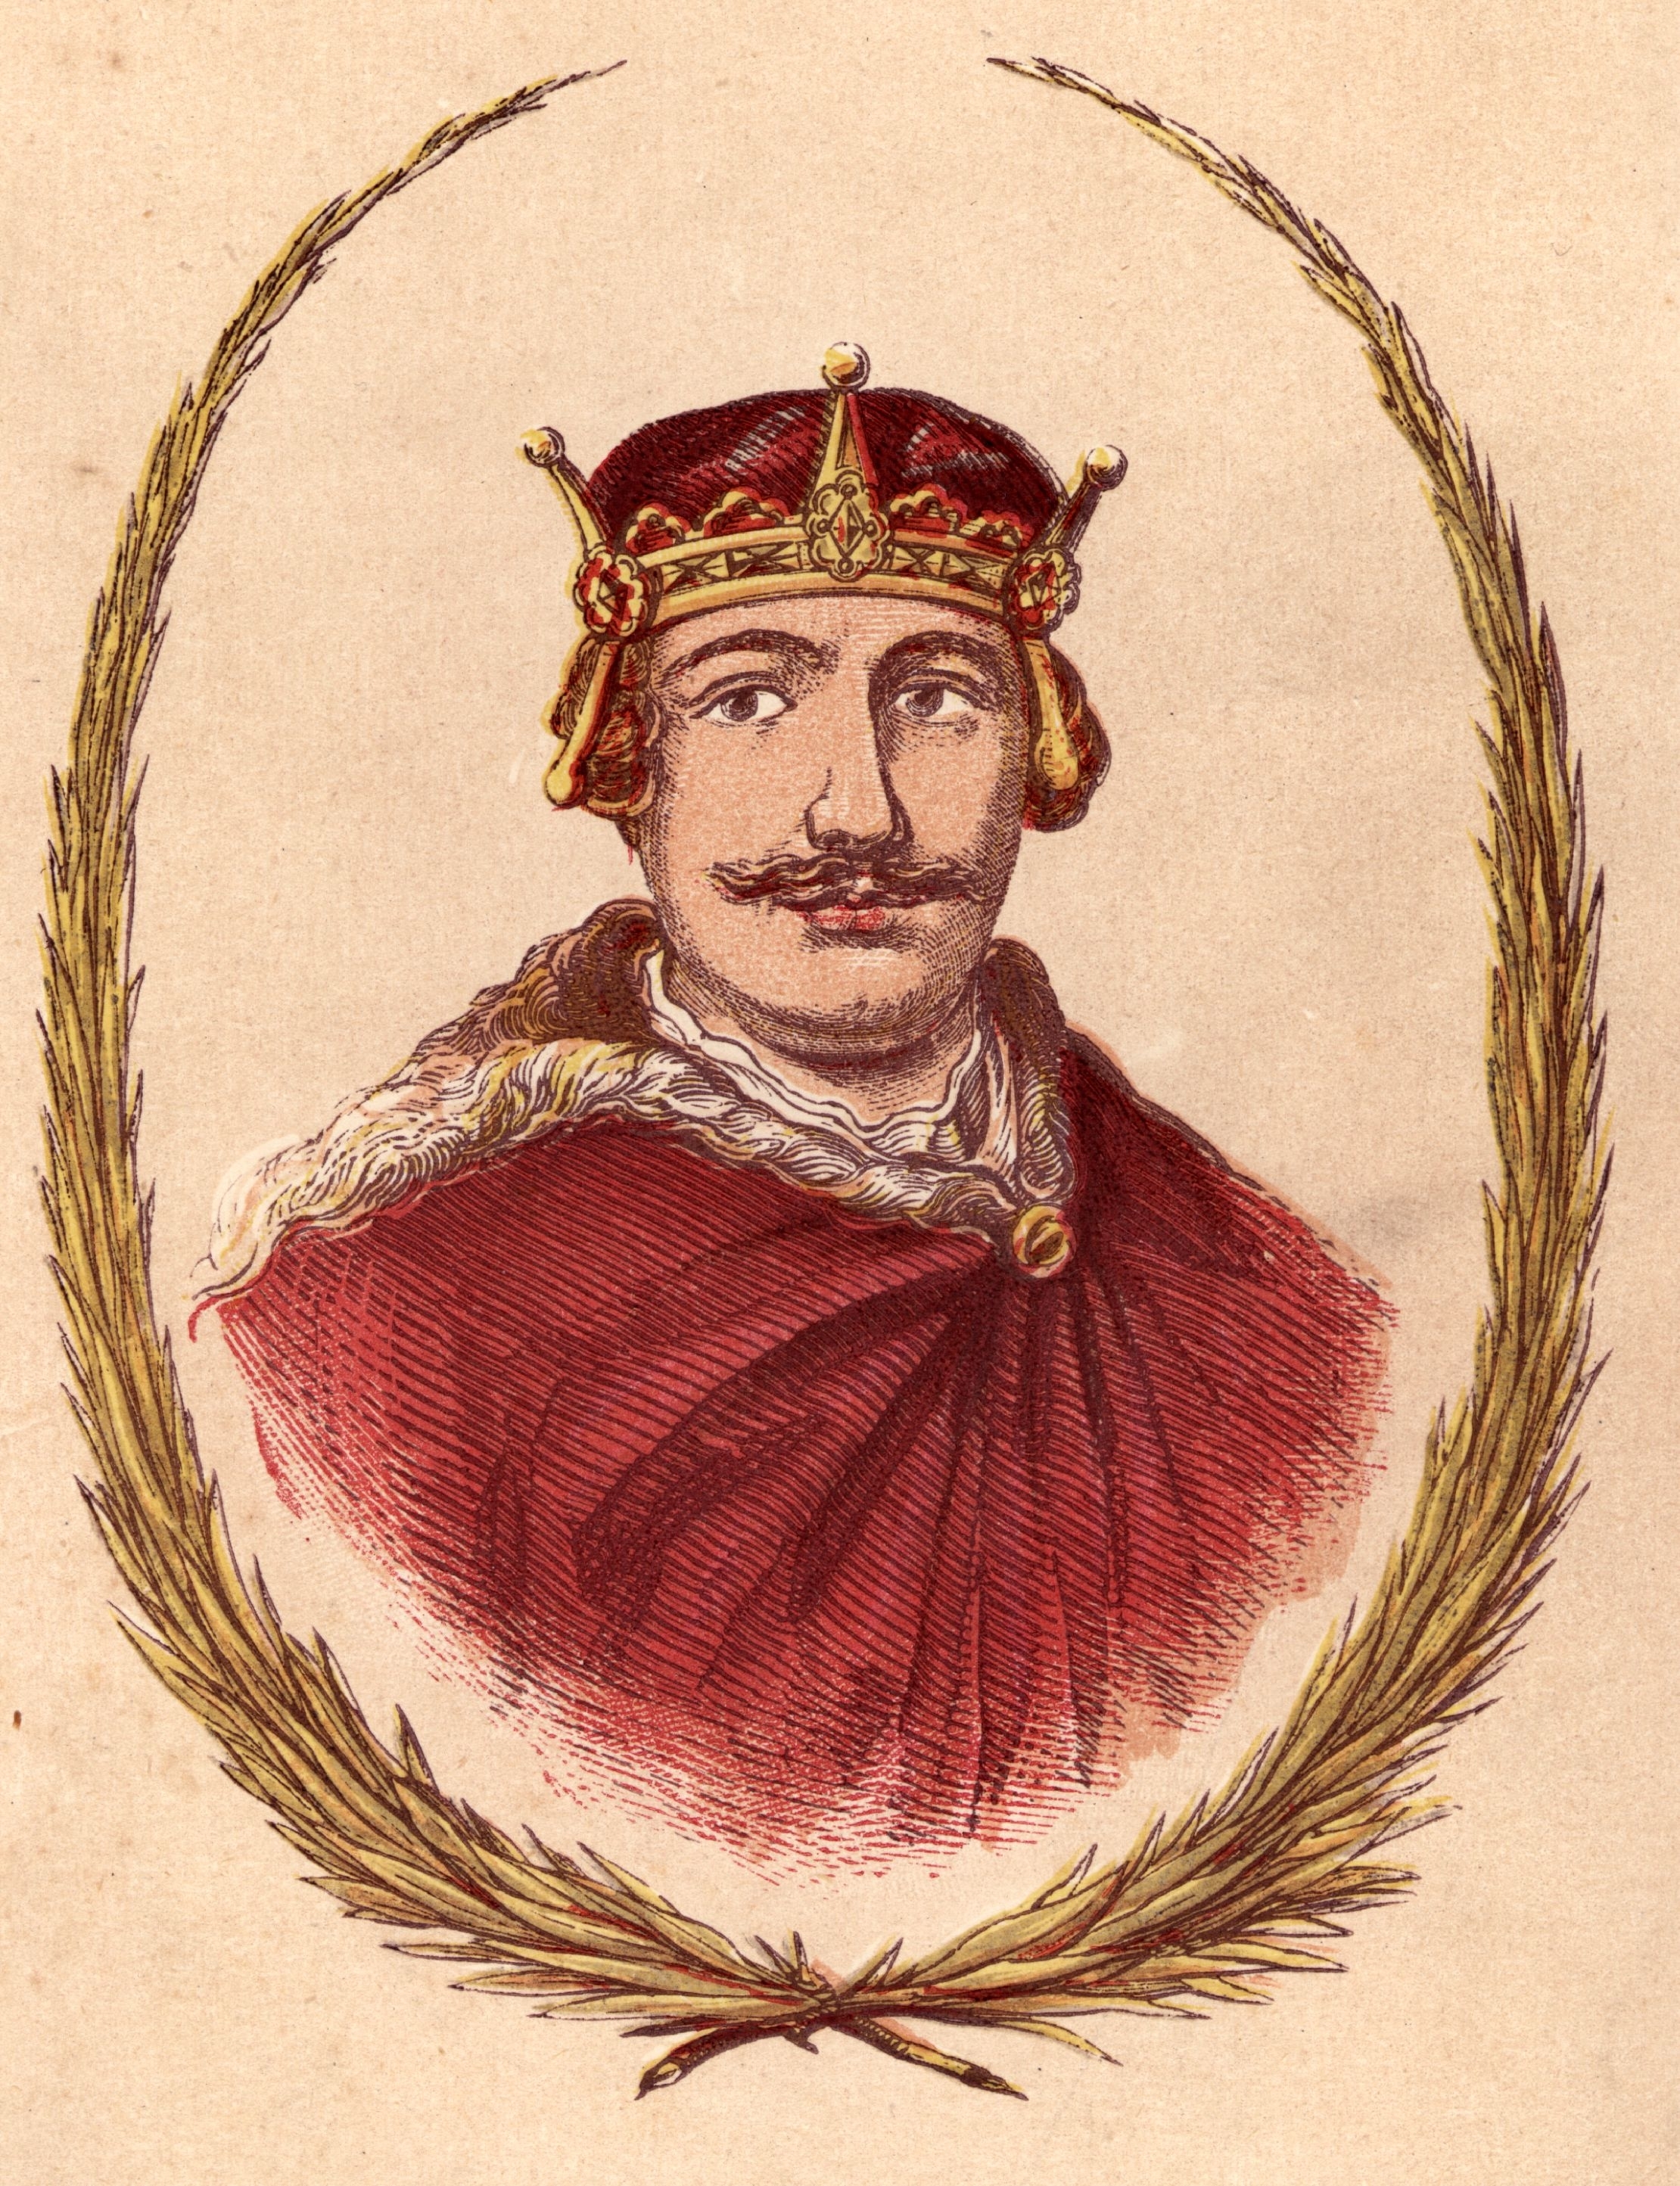 Illustration of King William II in historical attire within an oval frame